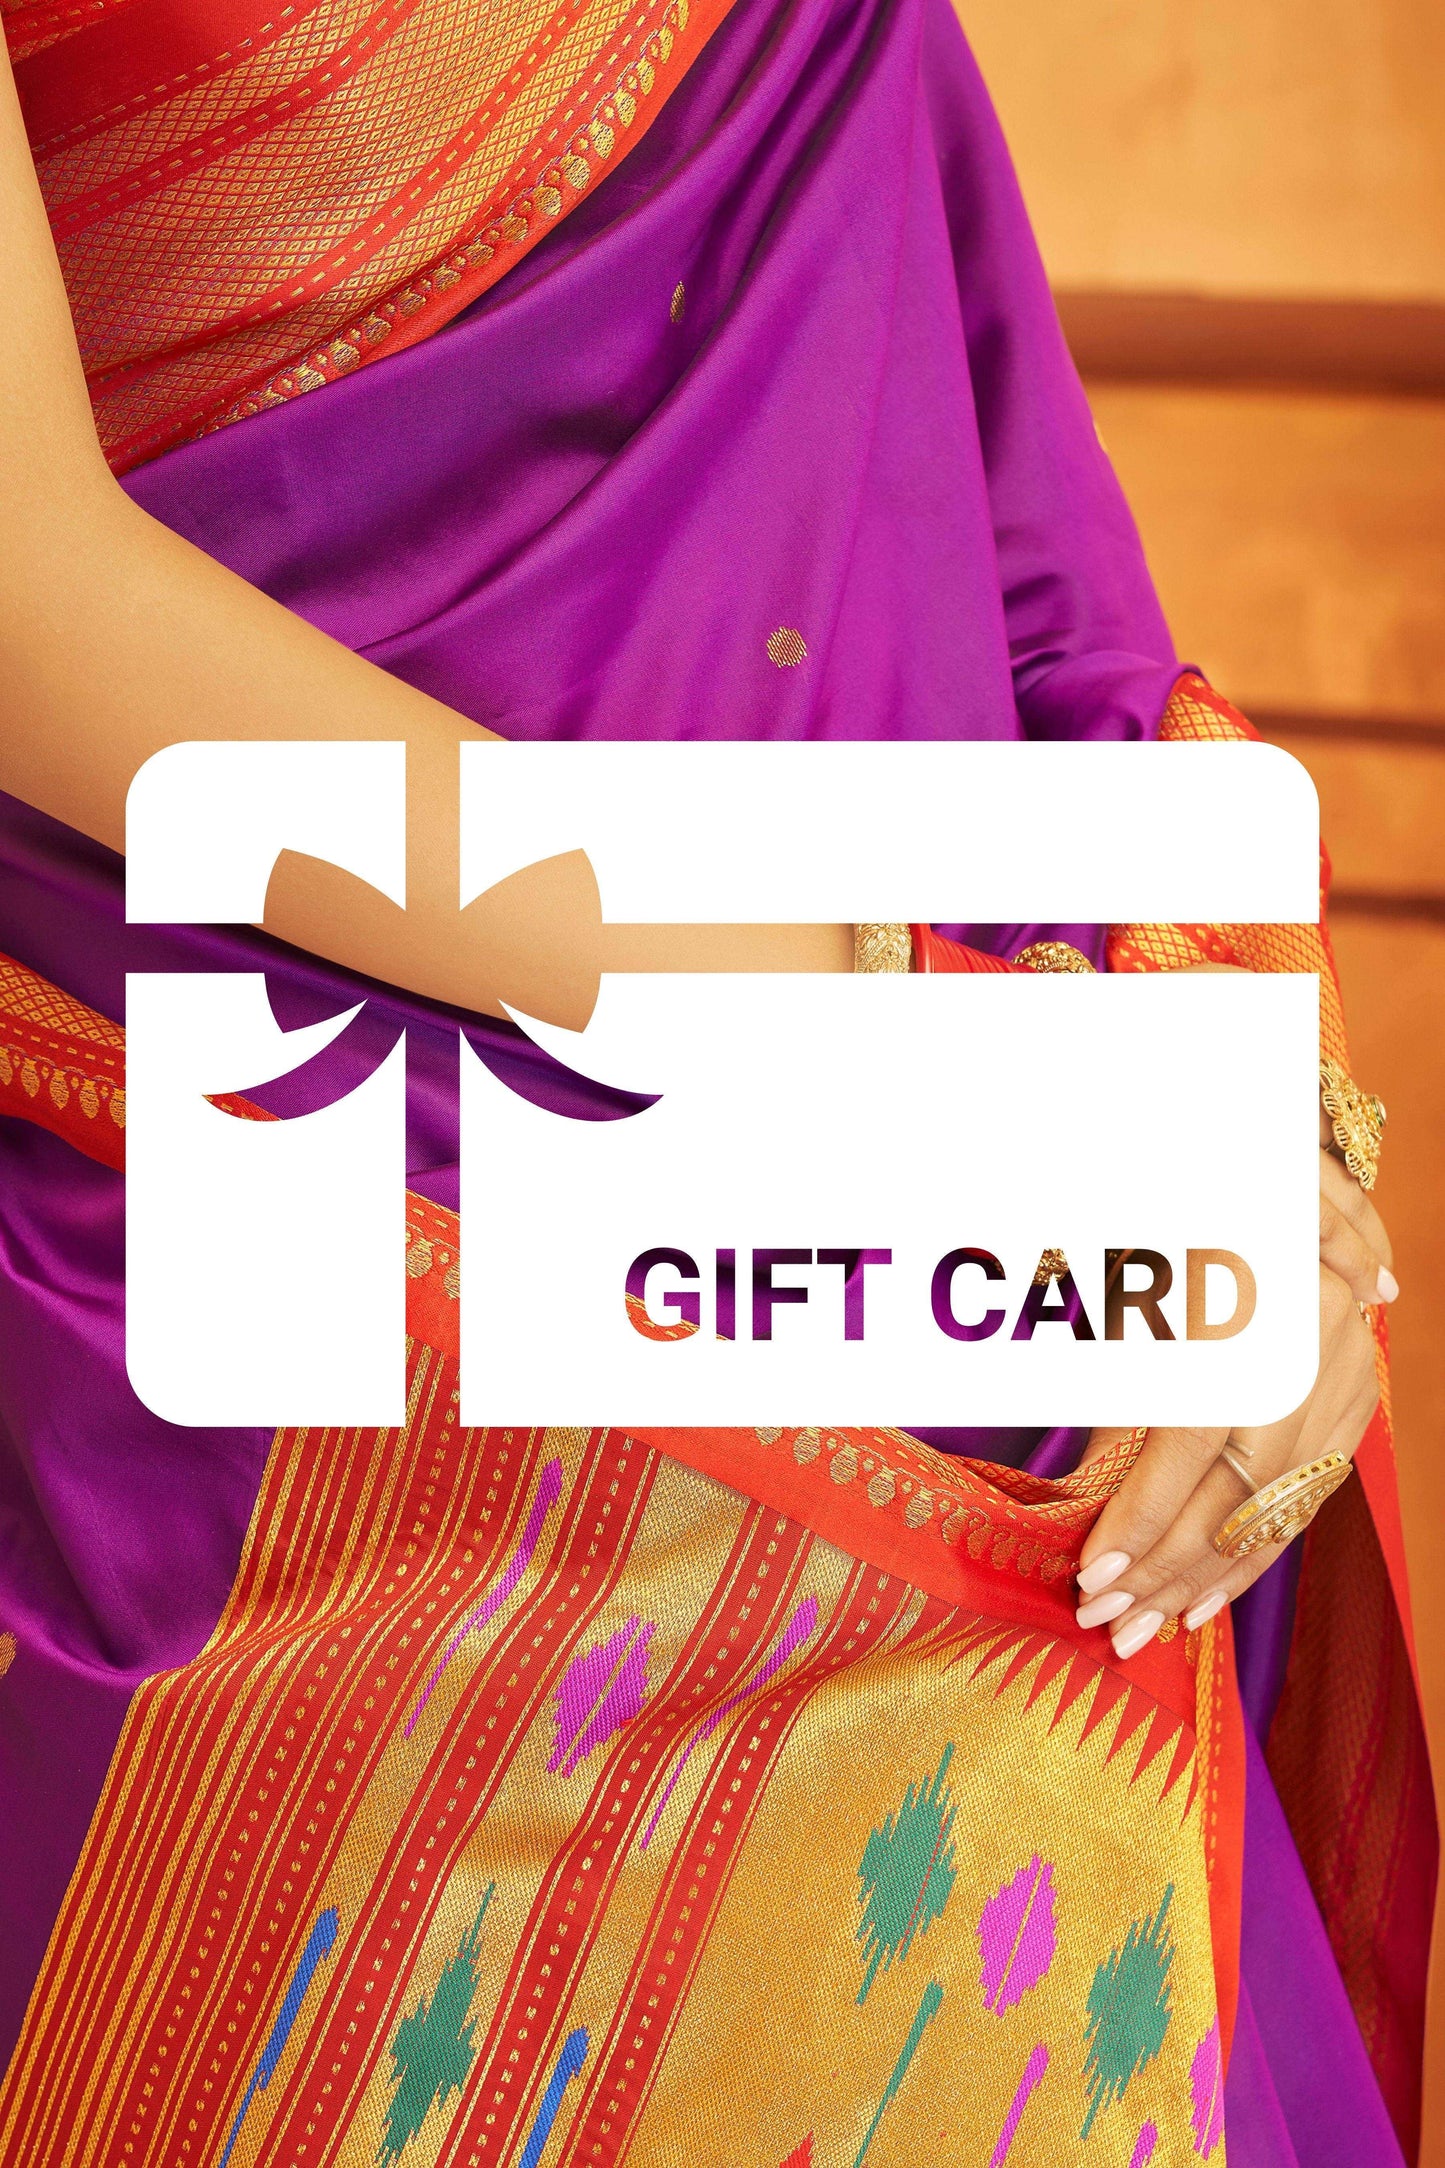            Unlock Joy: Gift the Freedom to Choose with a ₹10,000 Gift Card     Varkala Silk Sarees